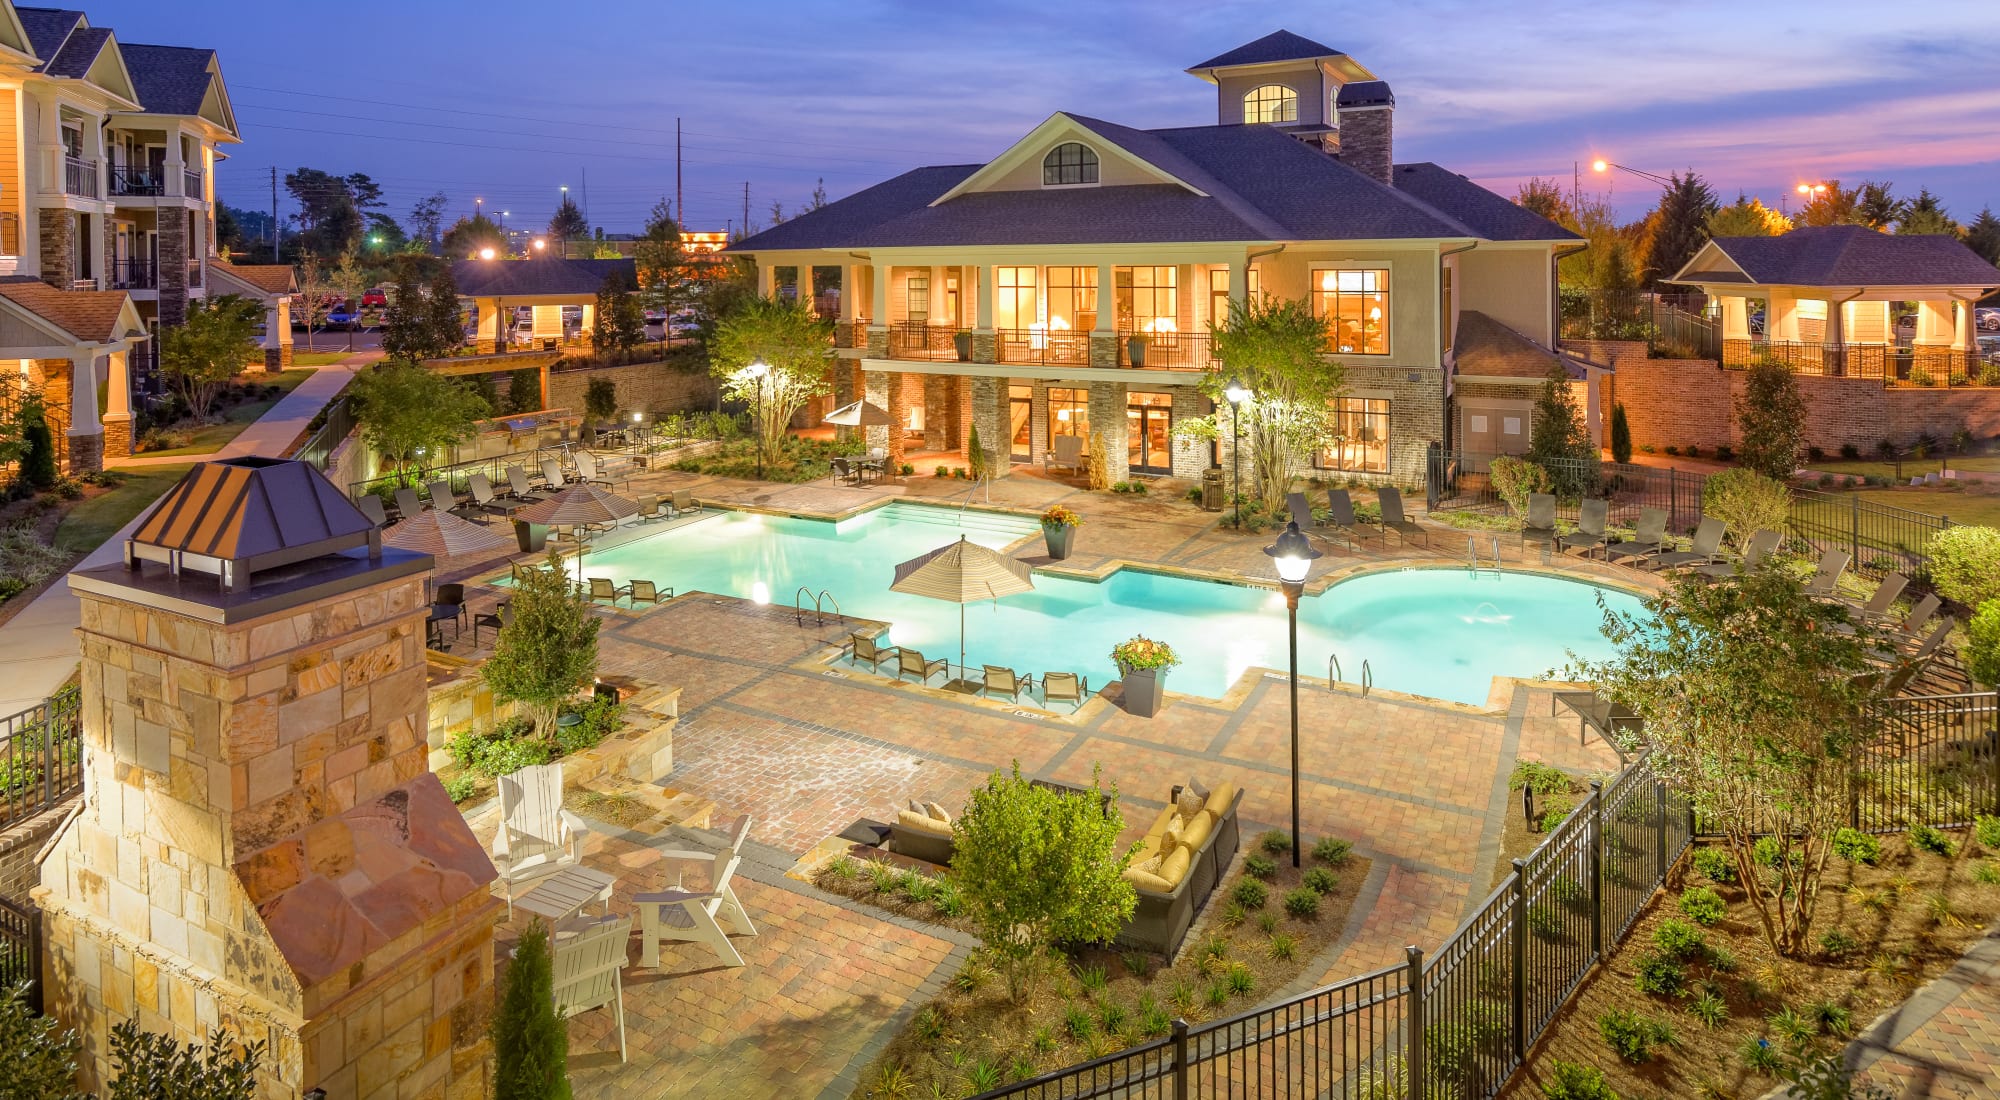 Apartments at Provenza at Old Peachtree in Suwanee, Georgia